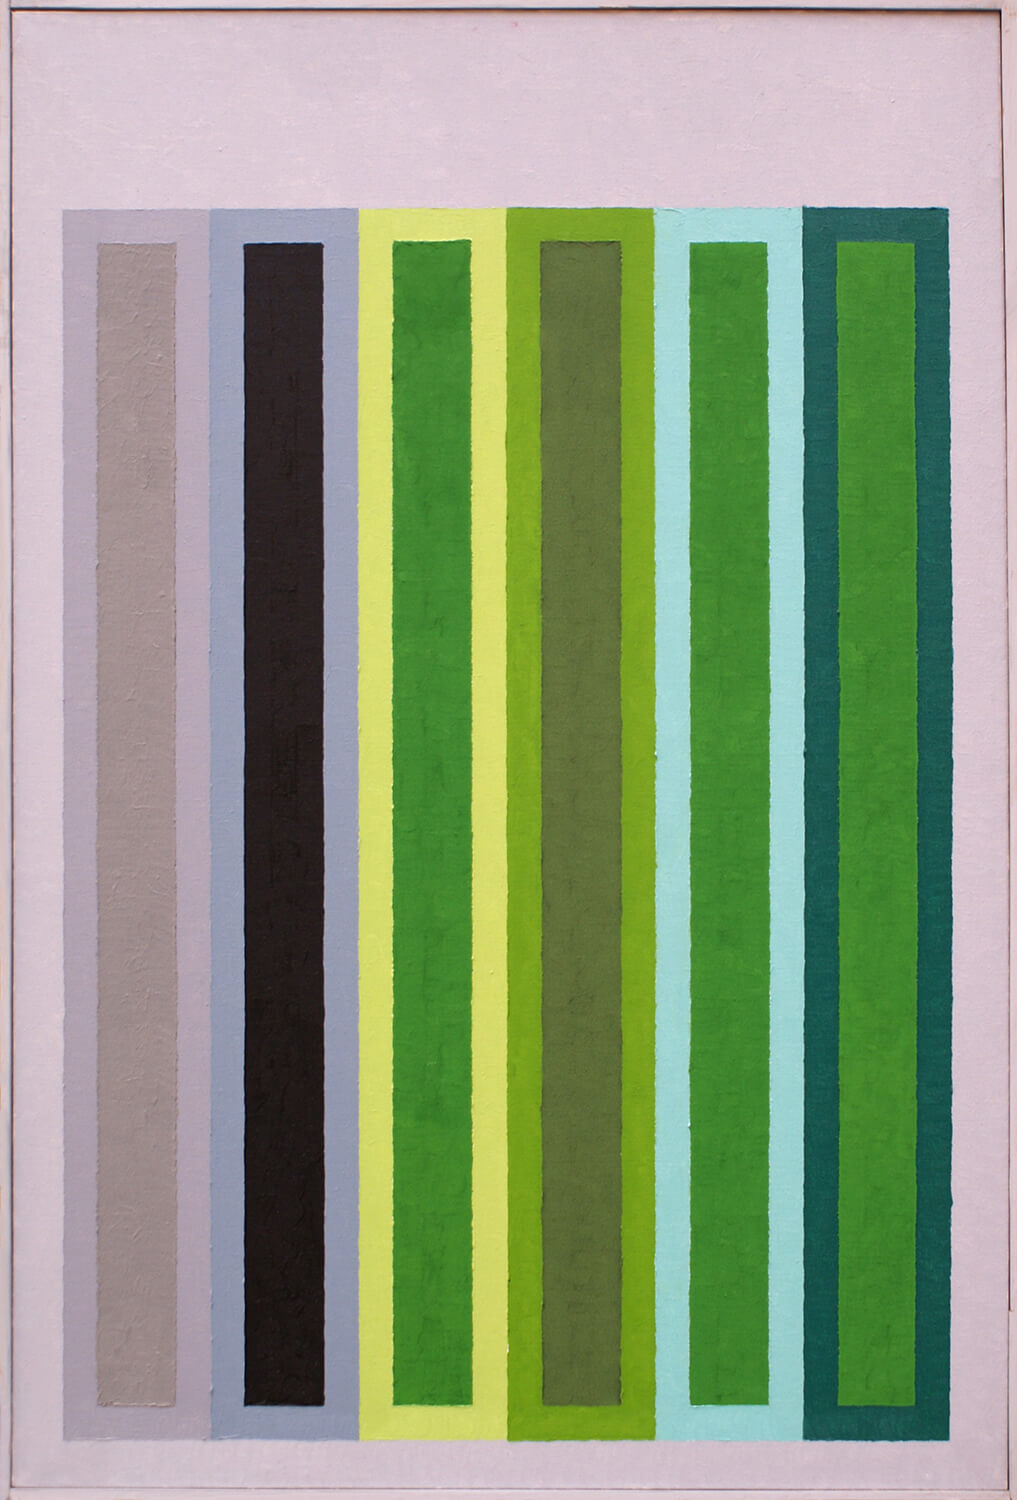 Peter Benkert, Untitled 3 (five-part series), 1977, acrylic on canvas, 90 x 60 cm